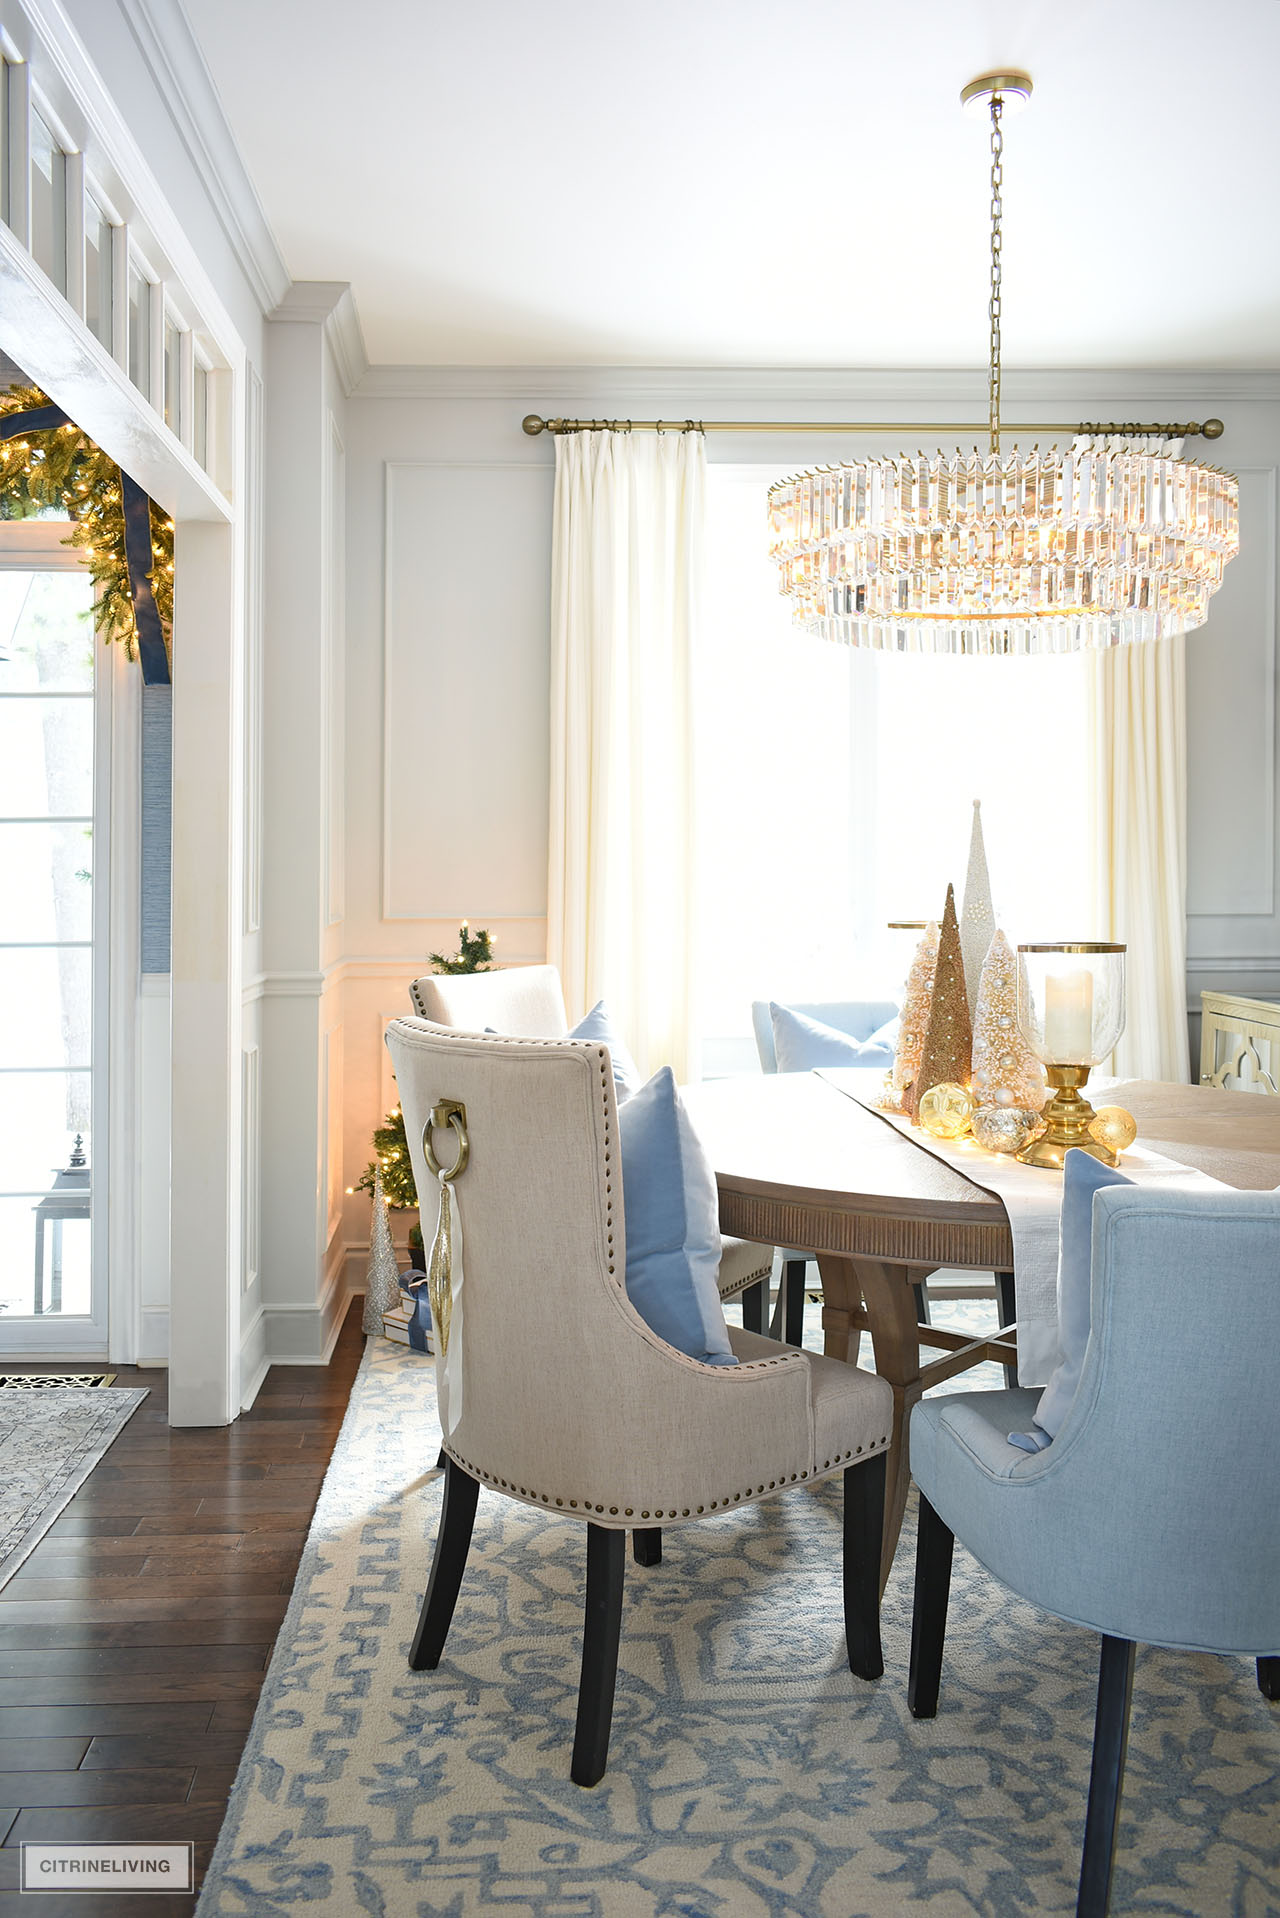 Dining room decorated for Christmas with simple decor and a centerpiece with white and gold tabletop trees and ornaments.